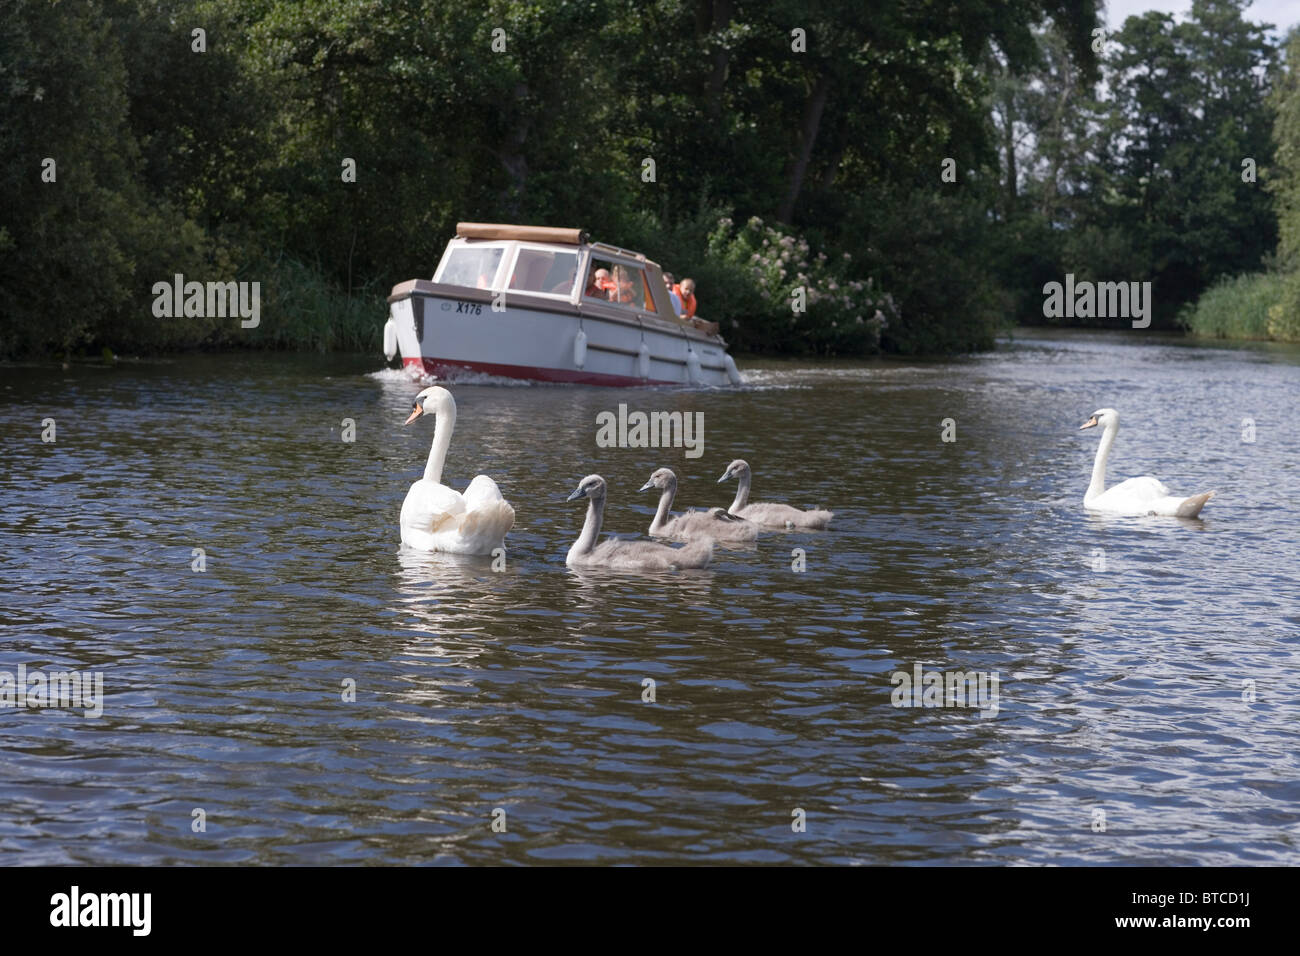 Recreational family boating in a motor cruiser, River Ant, Norfolk Broads with family of Mute Swans in attendace hoping for food Stock Photo